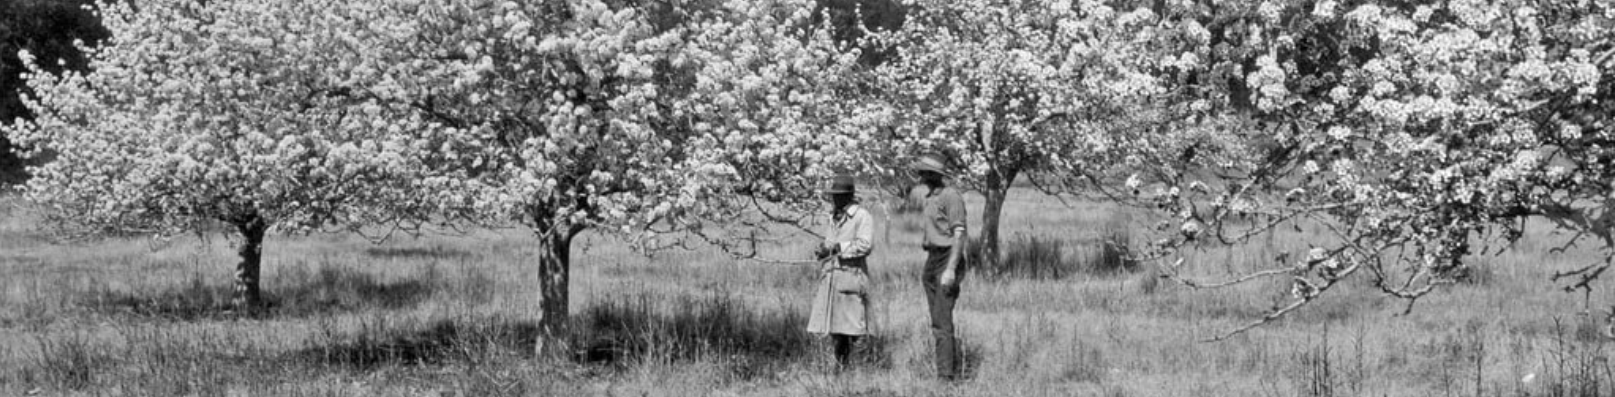 Old photo of two people in an orchard